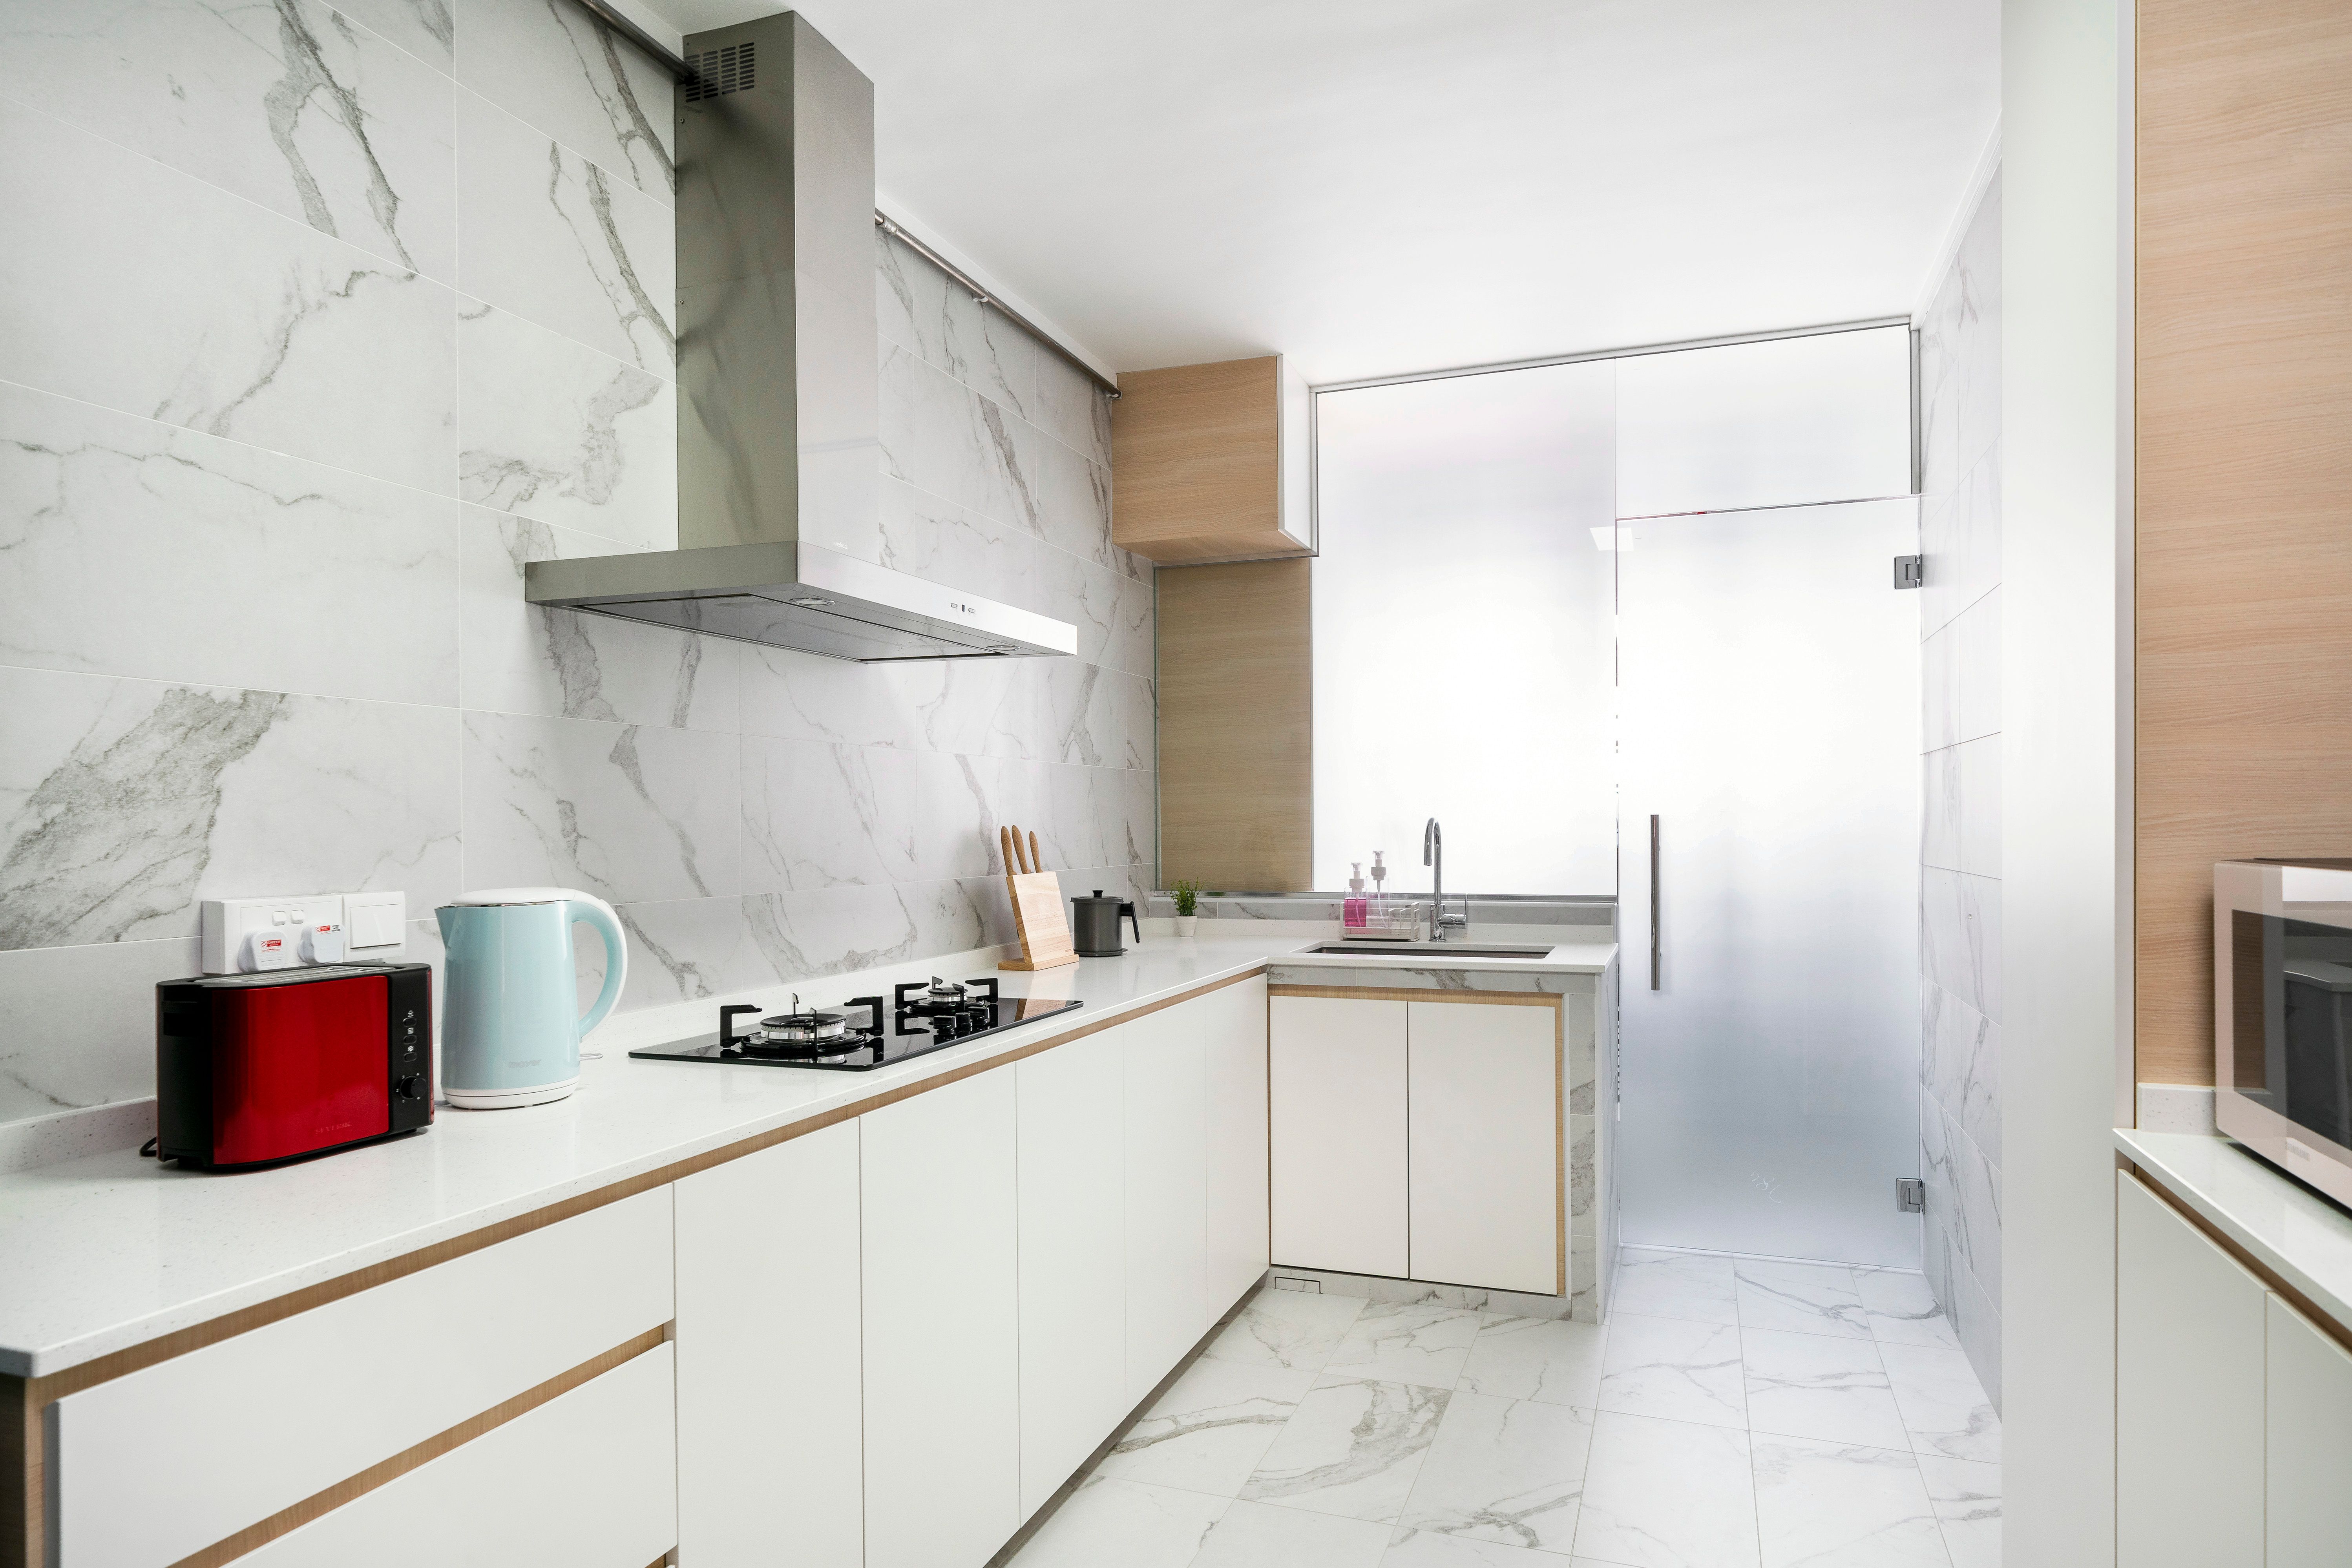 Minimalist Interior Design For Kitchens With Marble Dado Tiles